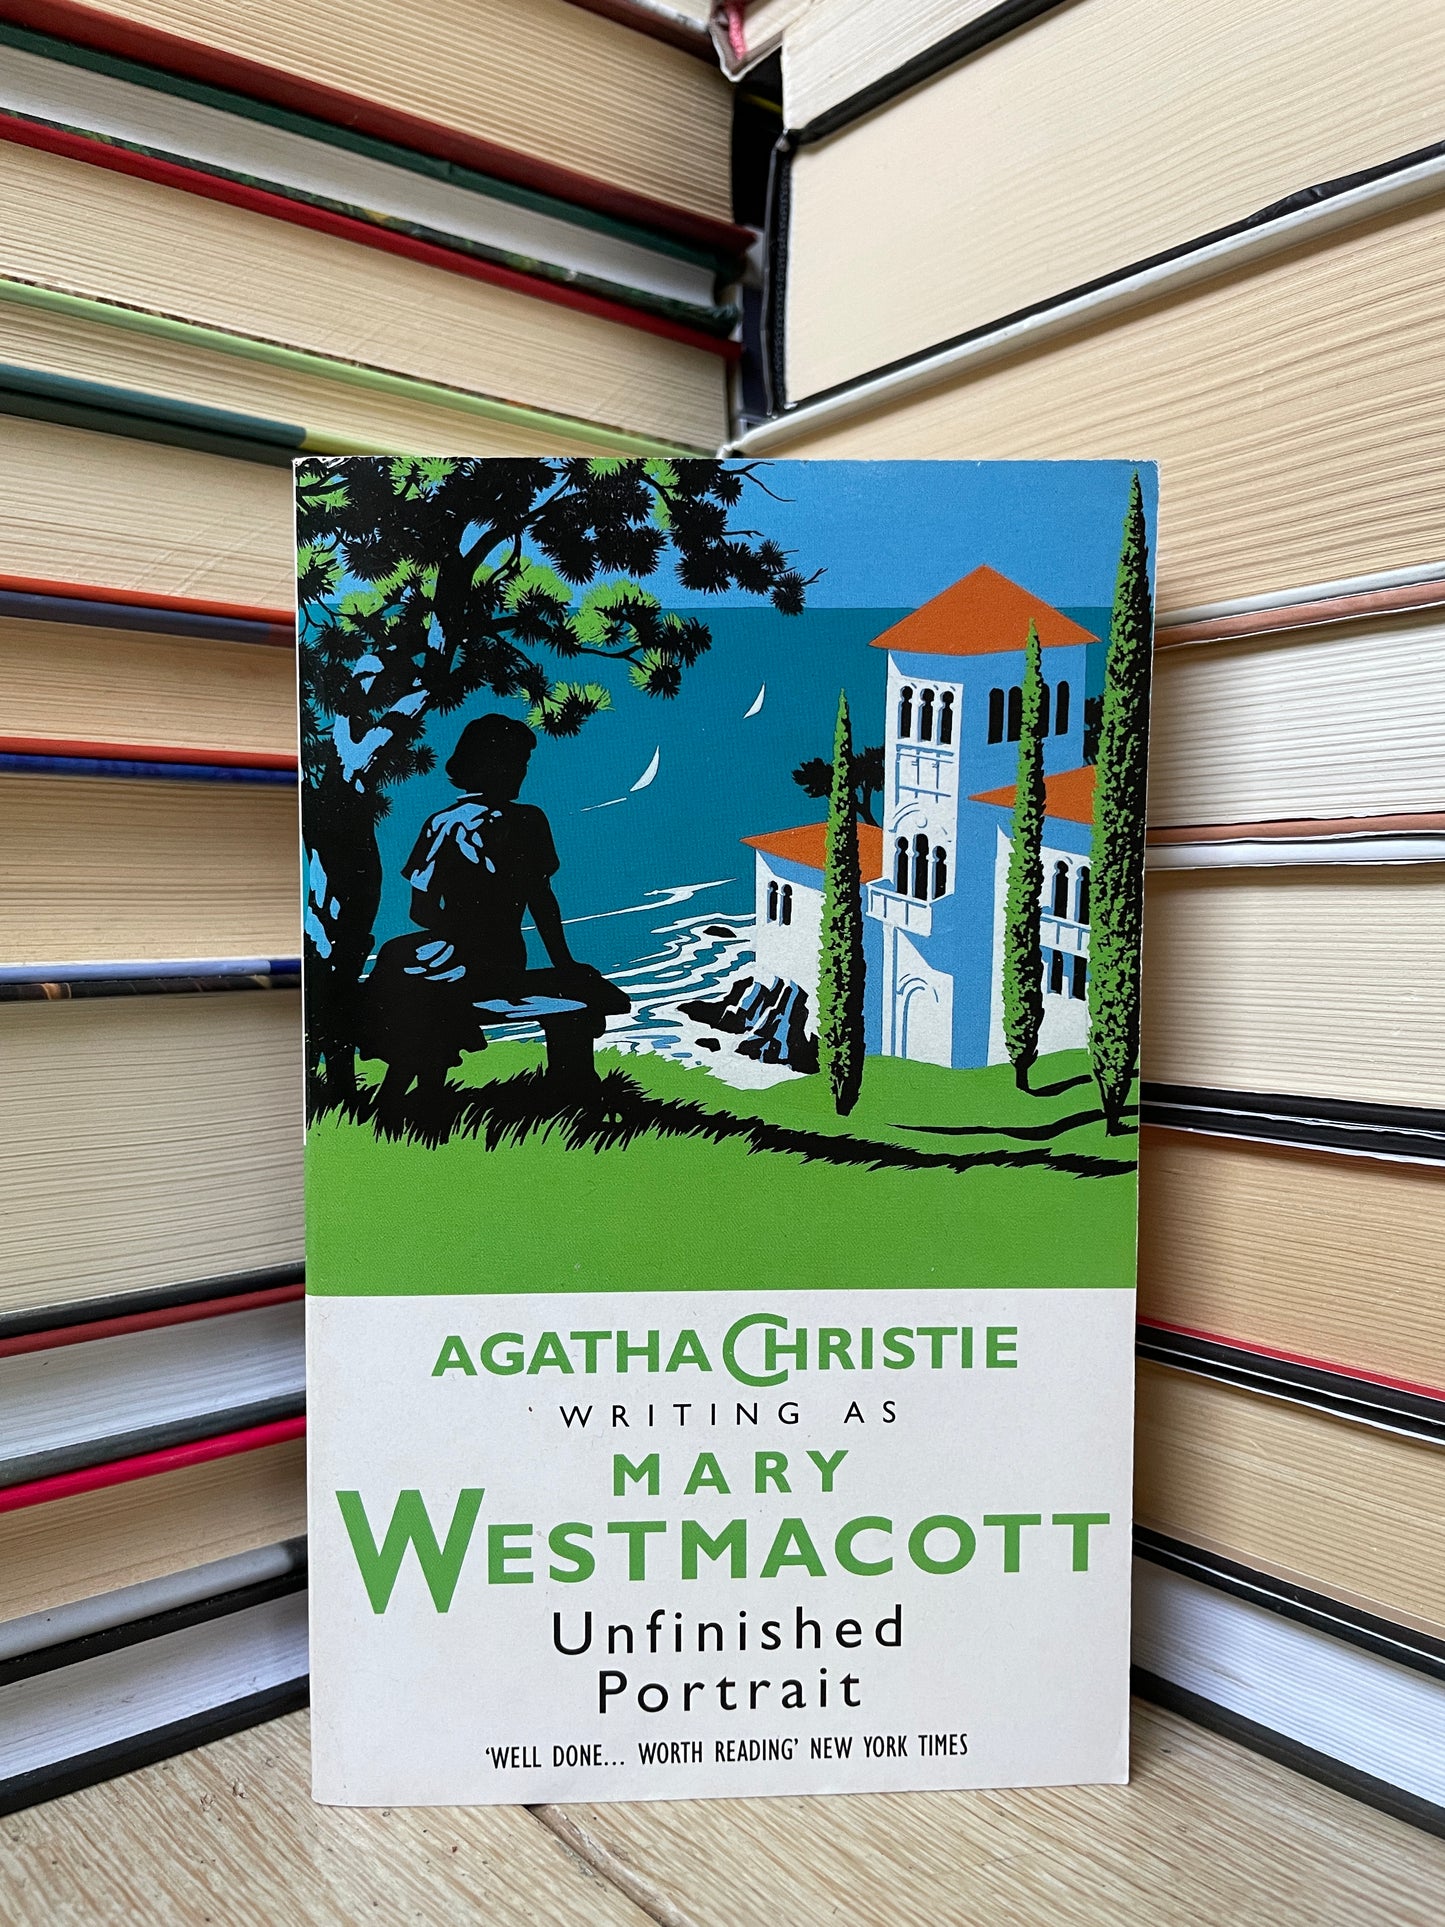 Mary Westmacott (Agatha Christie) - Unfinished Portrait